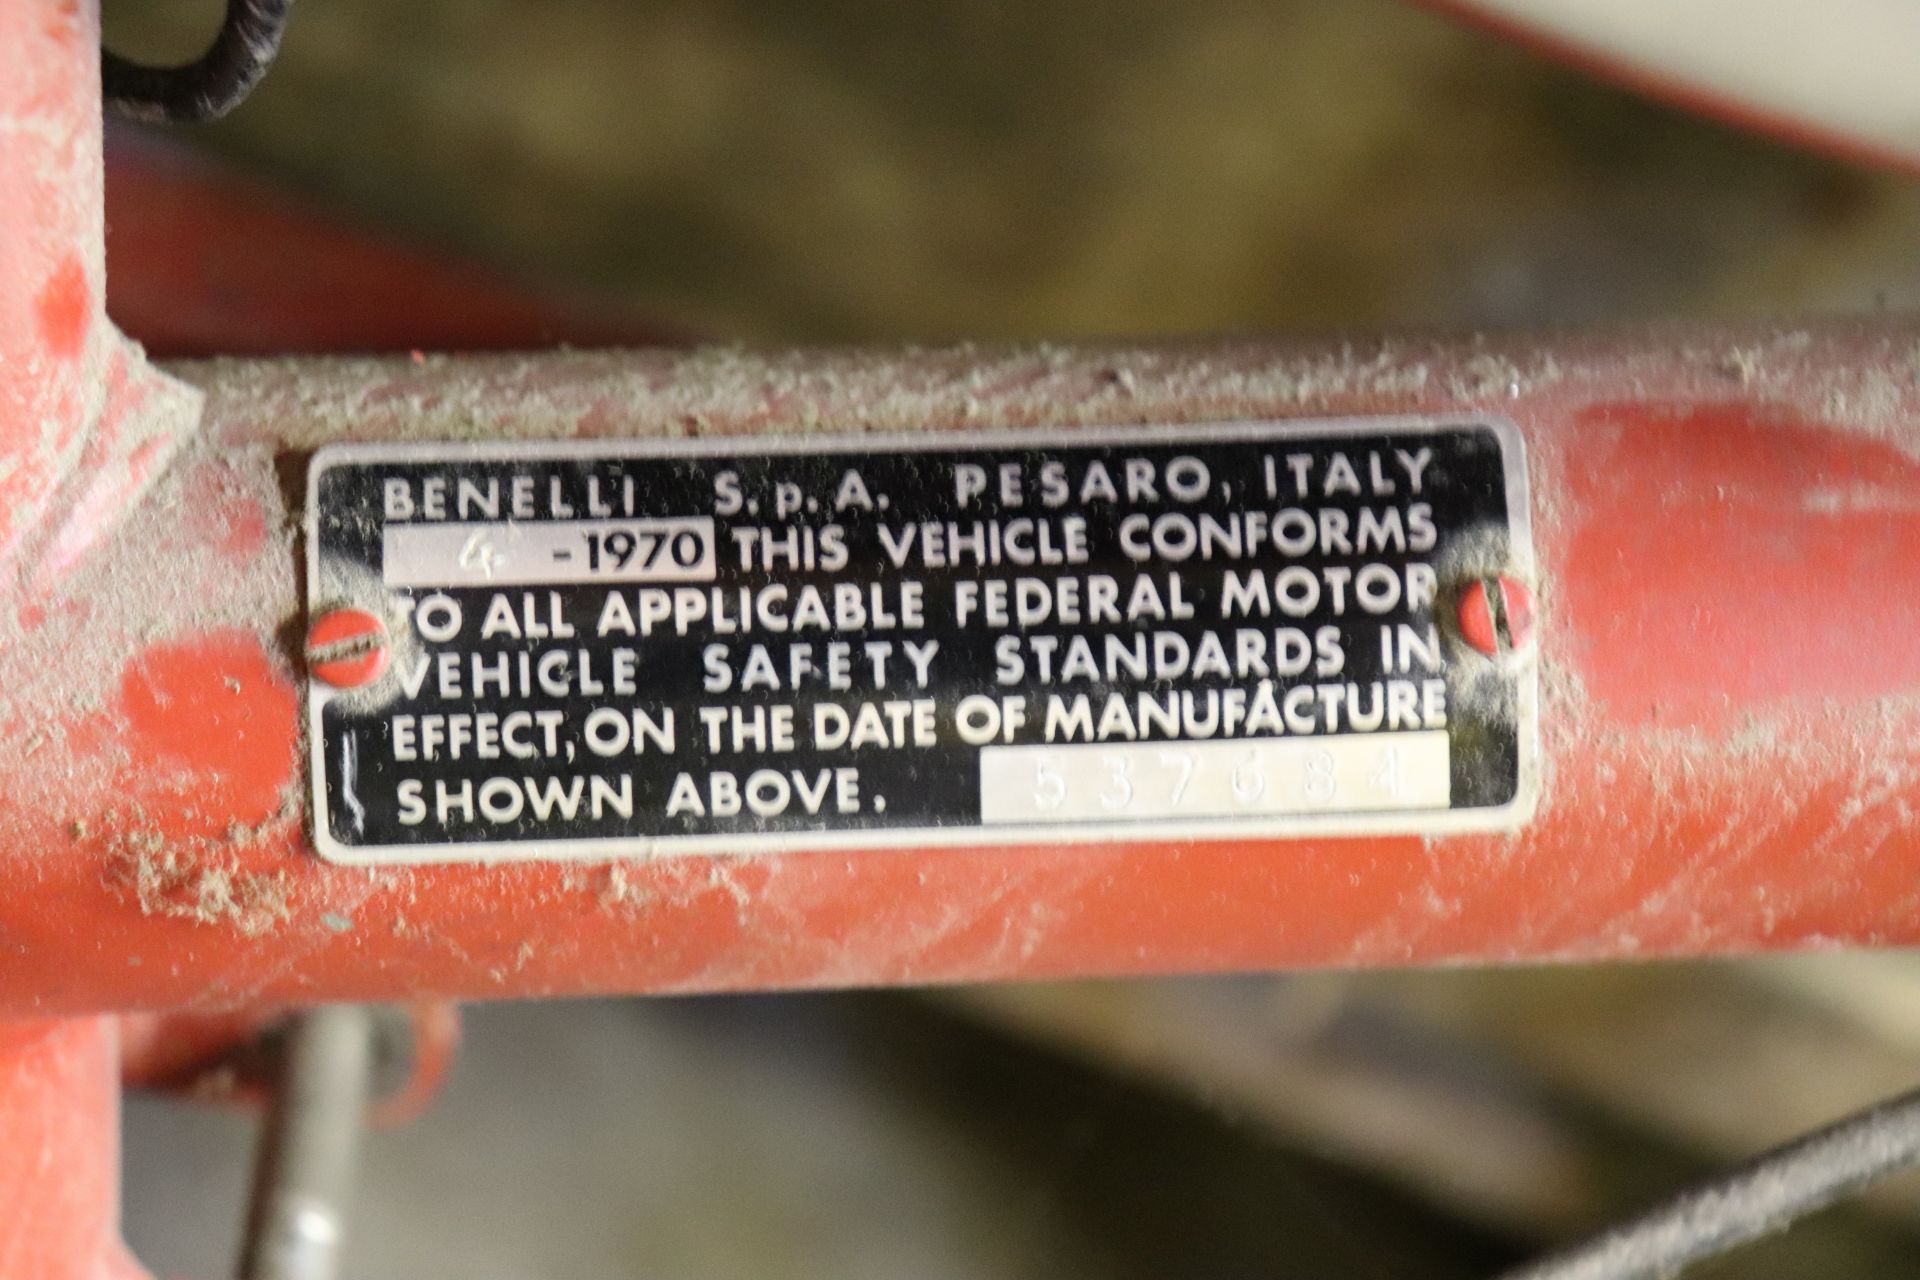 1970 Benelli Buzzer, rolling chassis, 1,262 miles, serial #537684 MINI BIKES MARKED AS PARTS BIKES, - Image 6 of 7